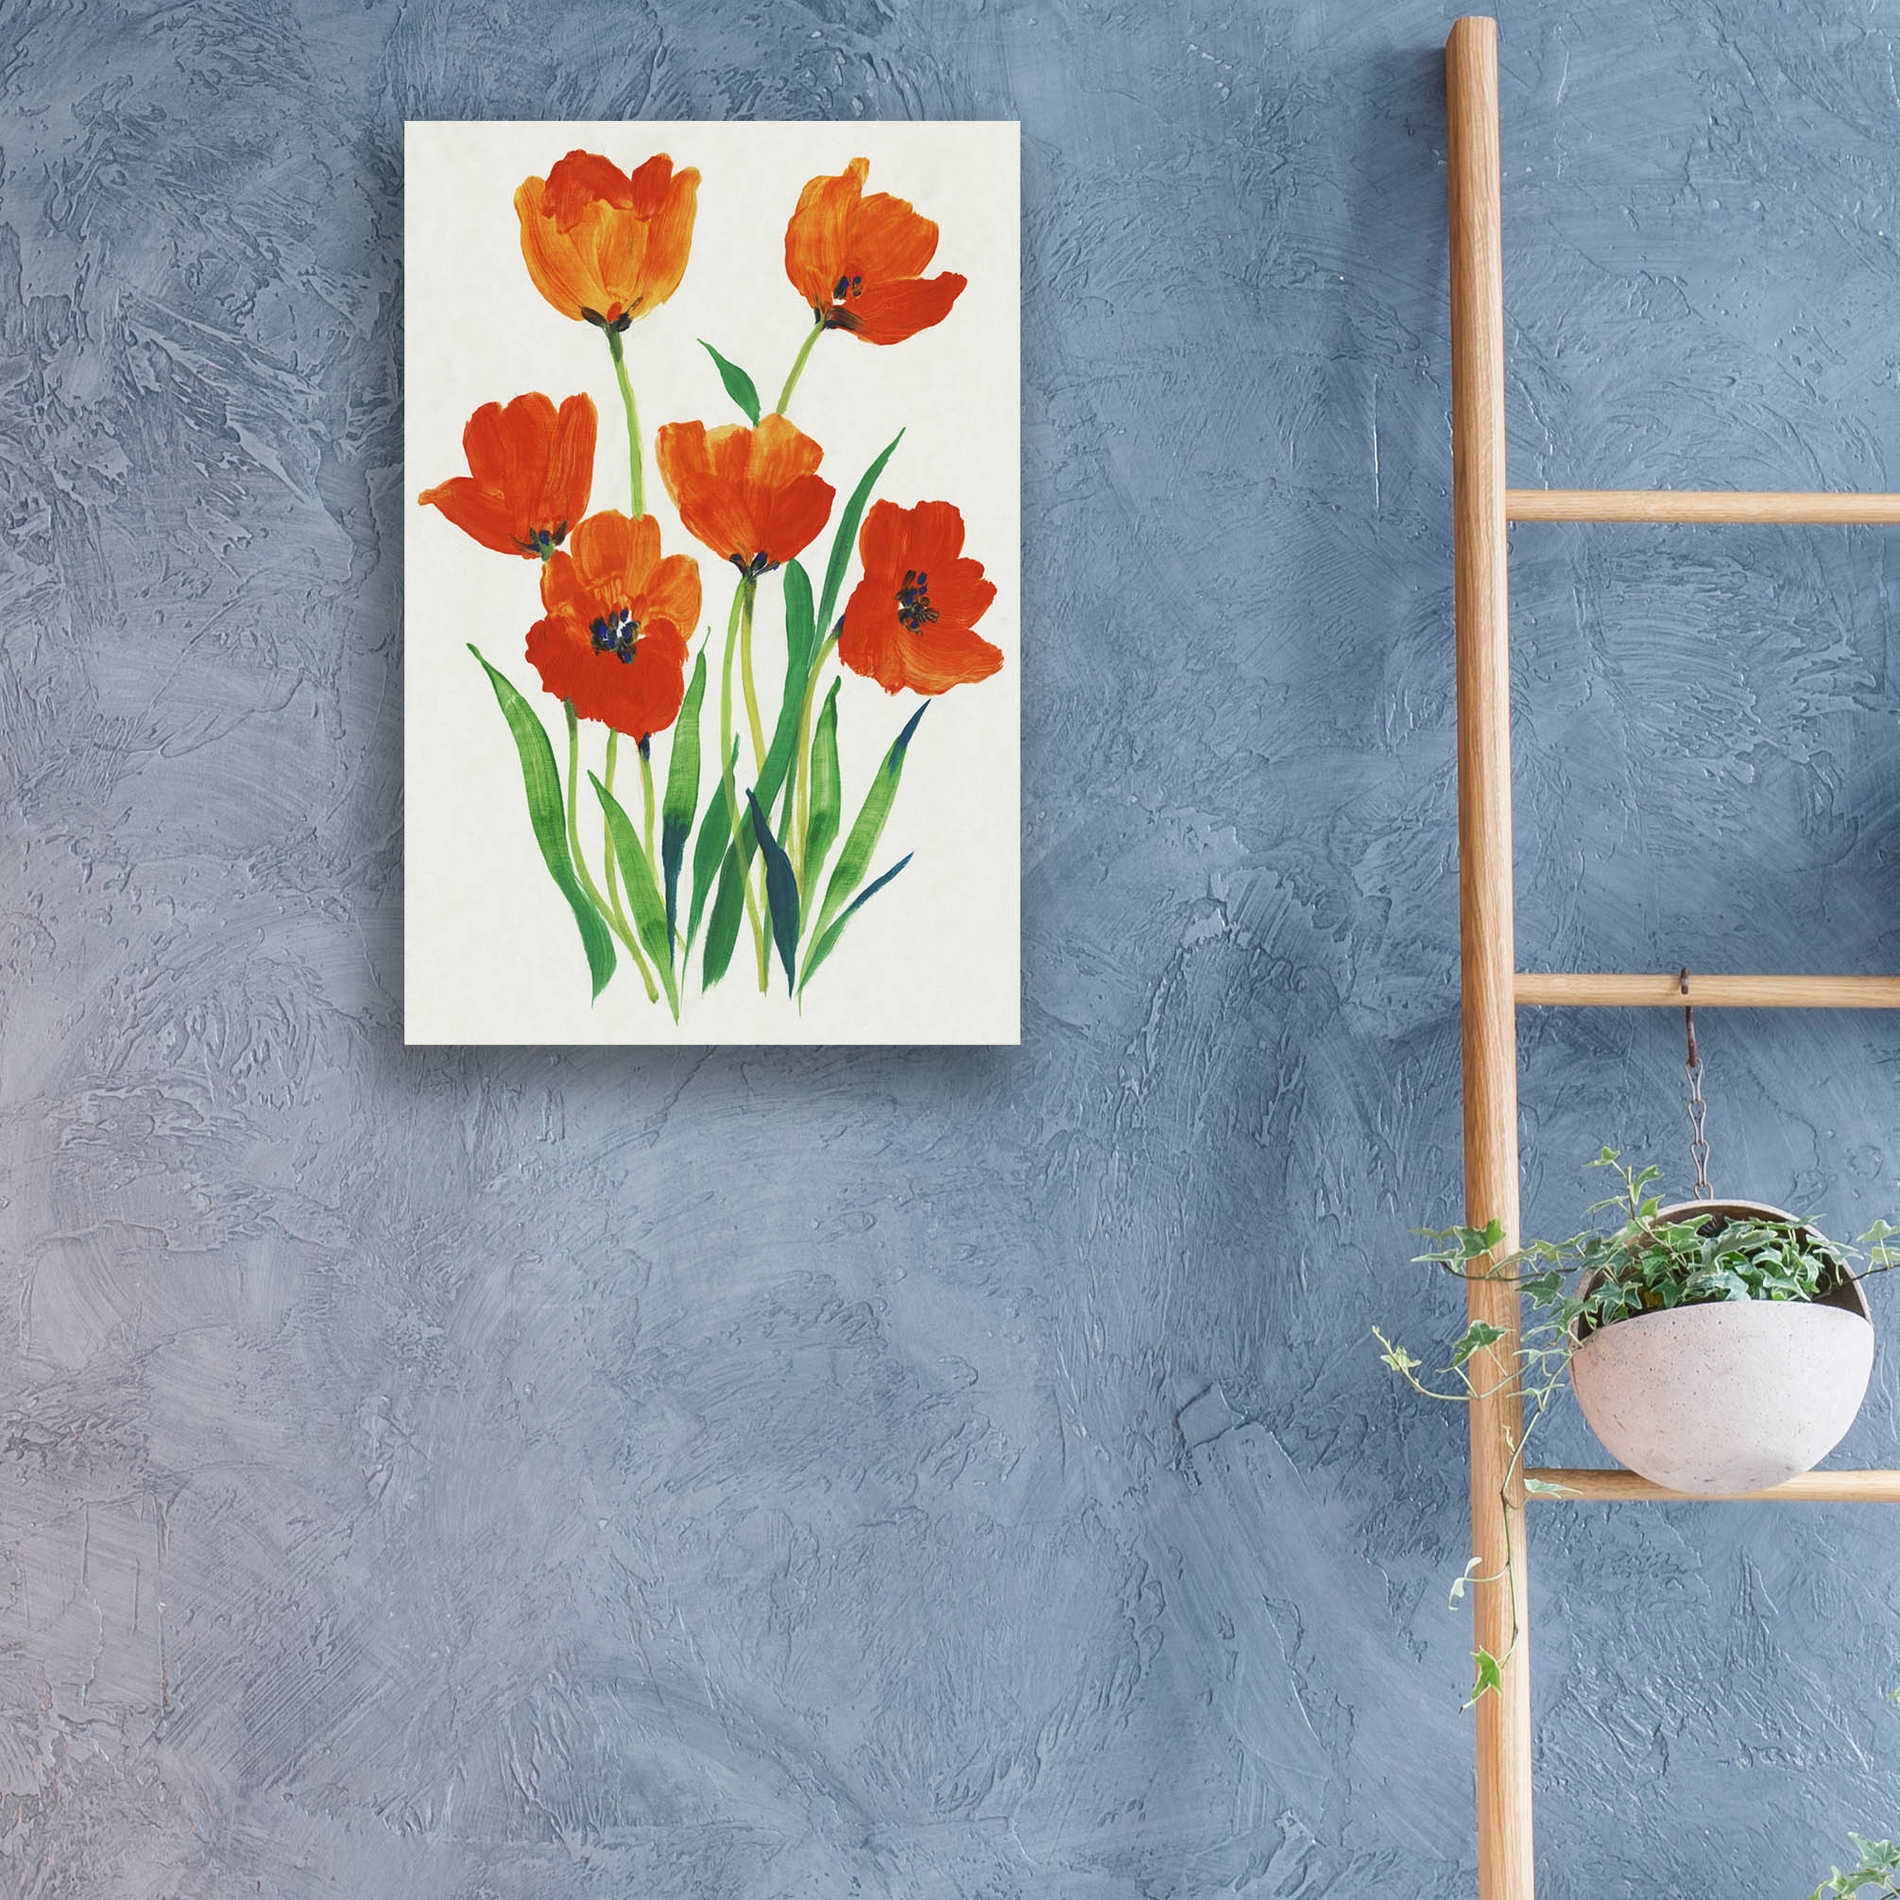 Epic Art 'Red Tulips in Bloom I' by Tim O'Toole, Acrylic Glass Wall Art,16x24